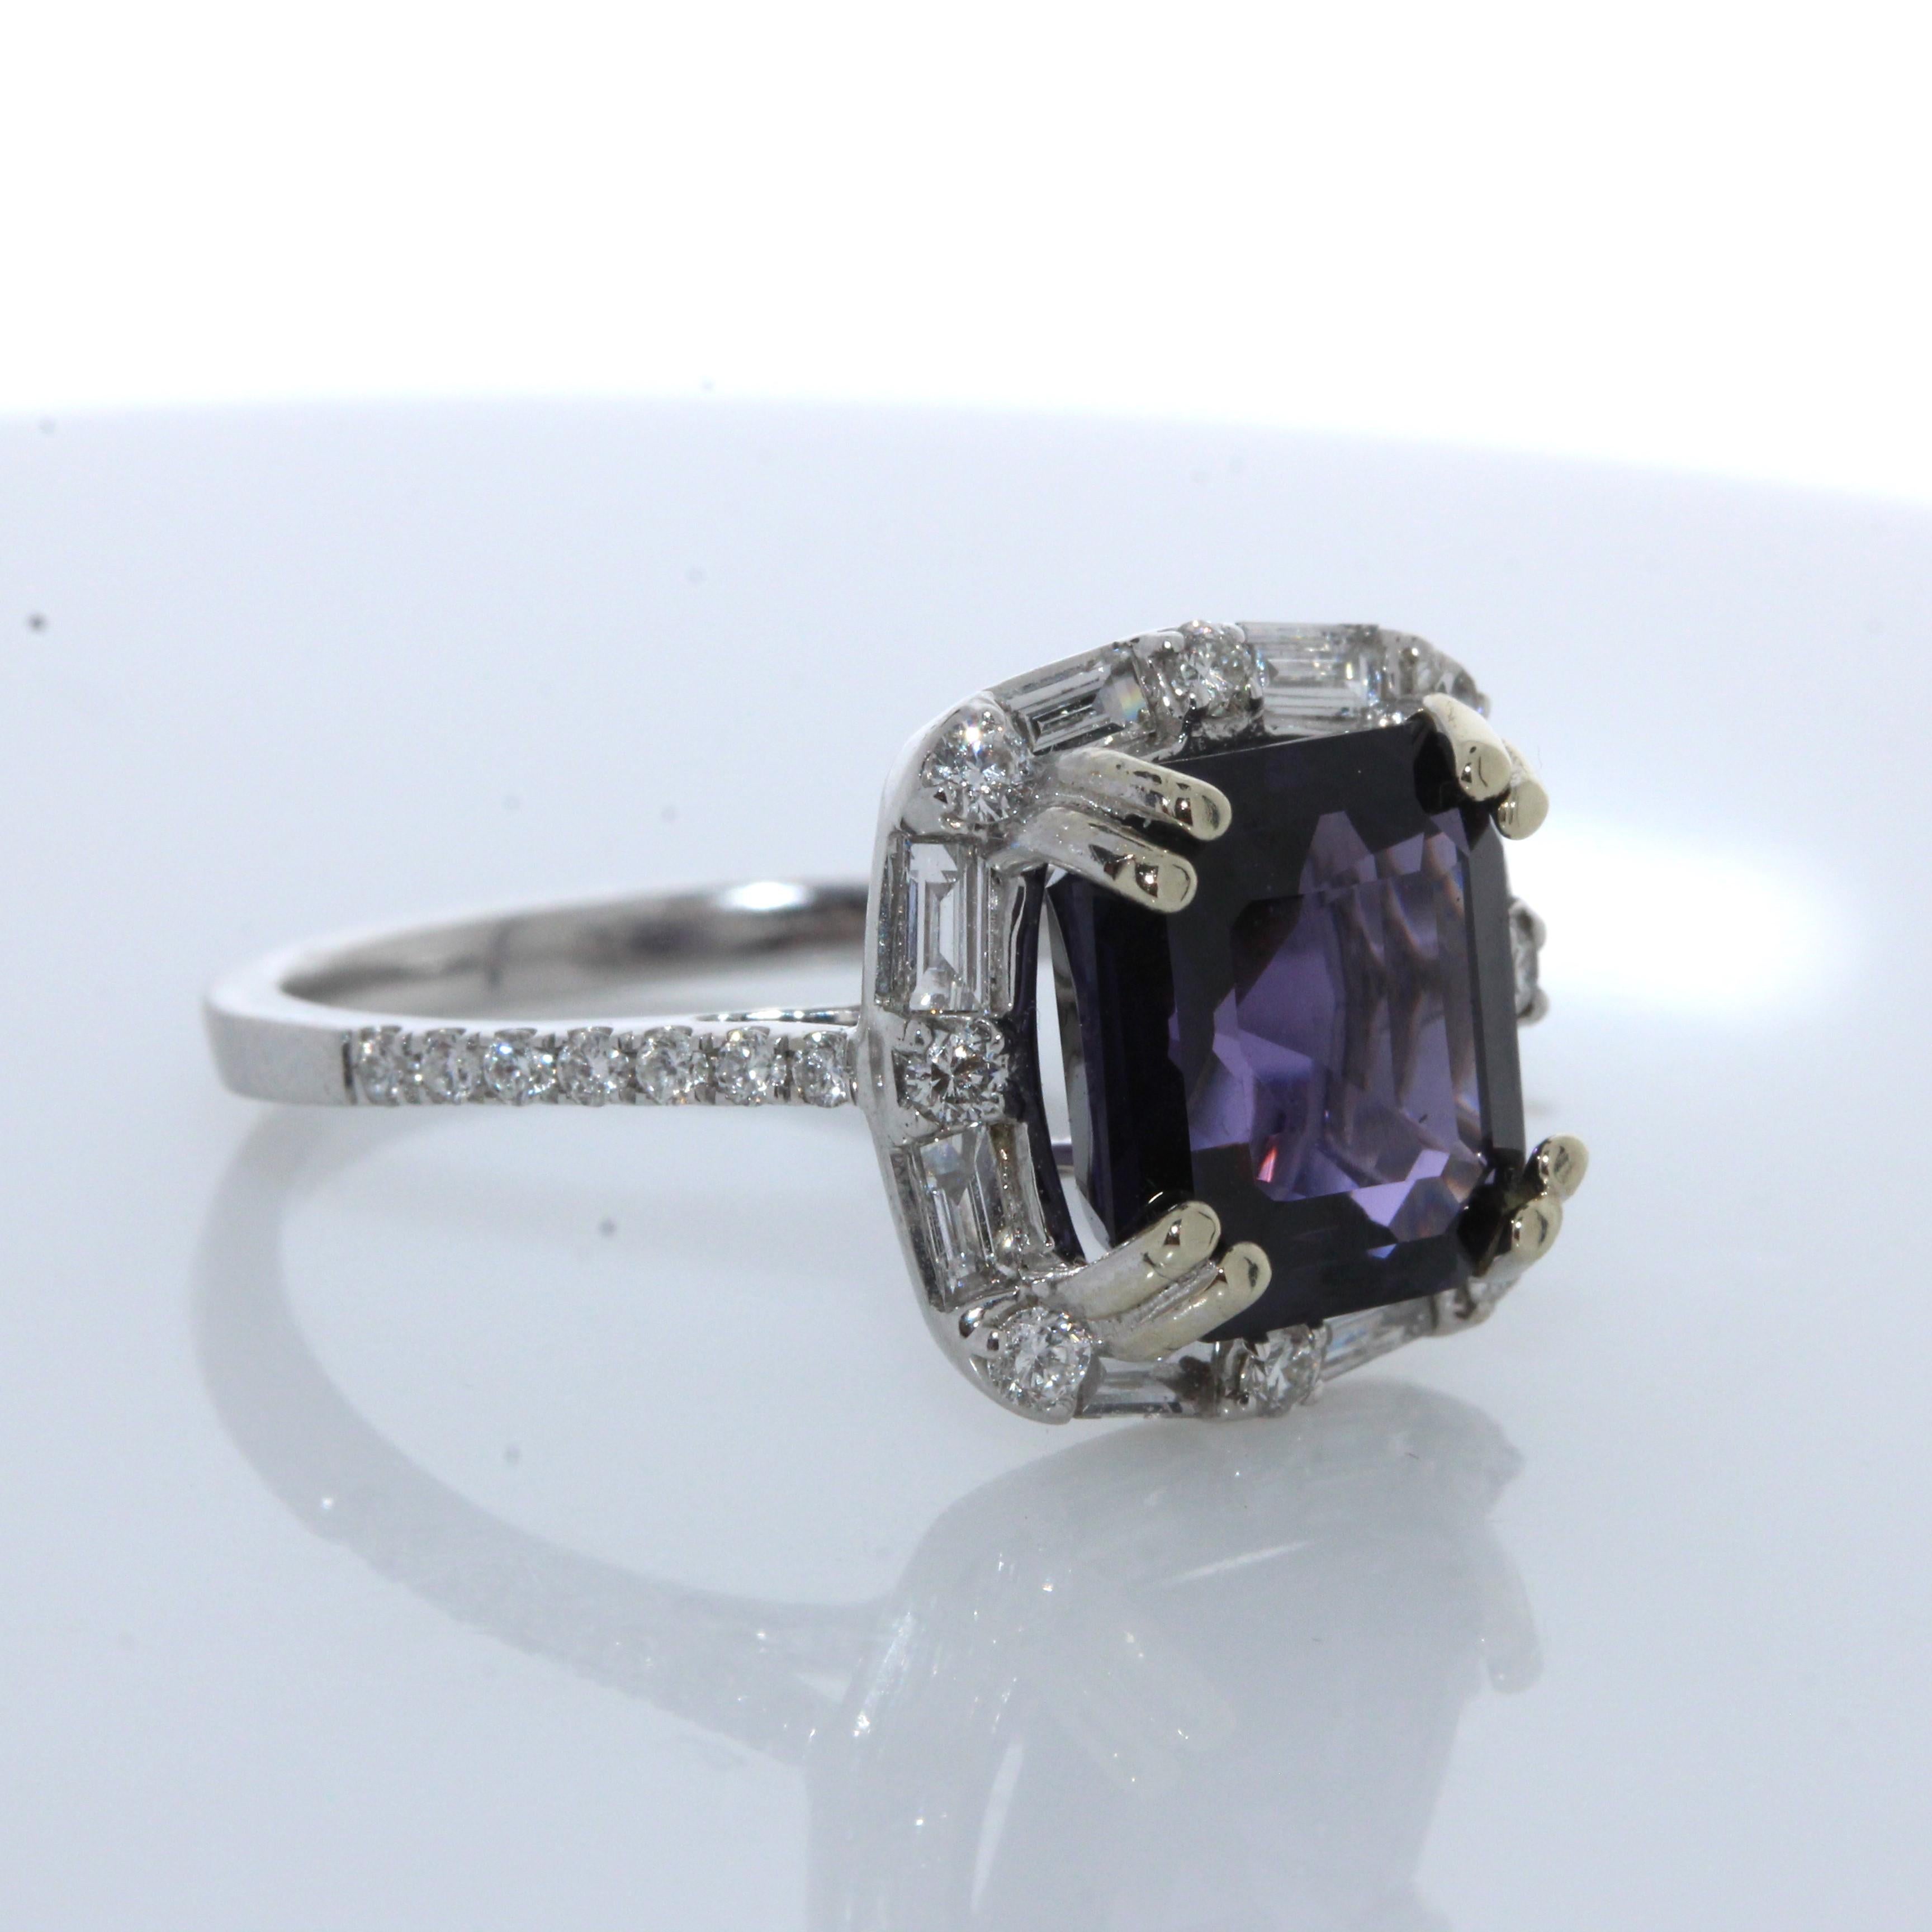 Contemporary 4.45 Carat Cushion Purple Spinel and Diamond Ring in 14K White Gold For Sale